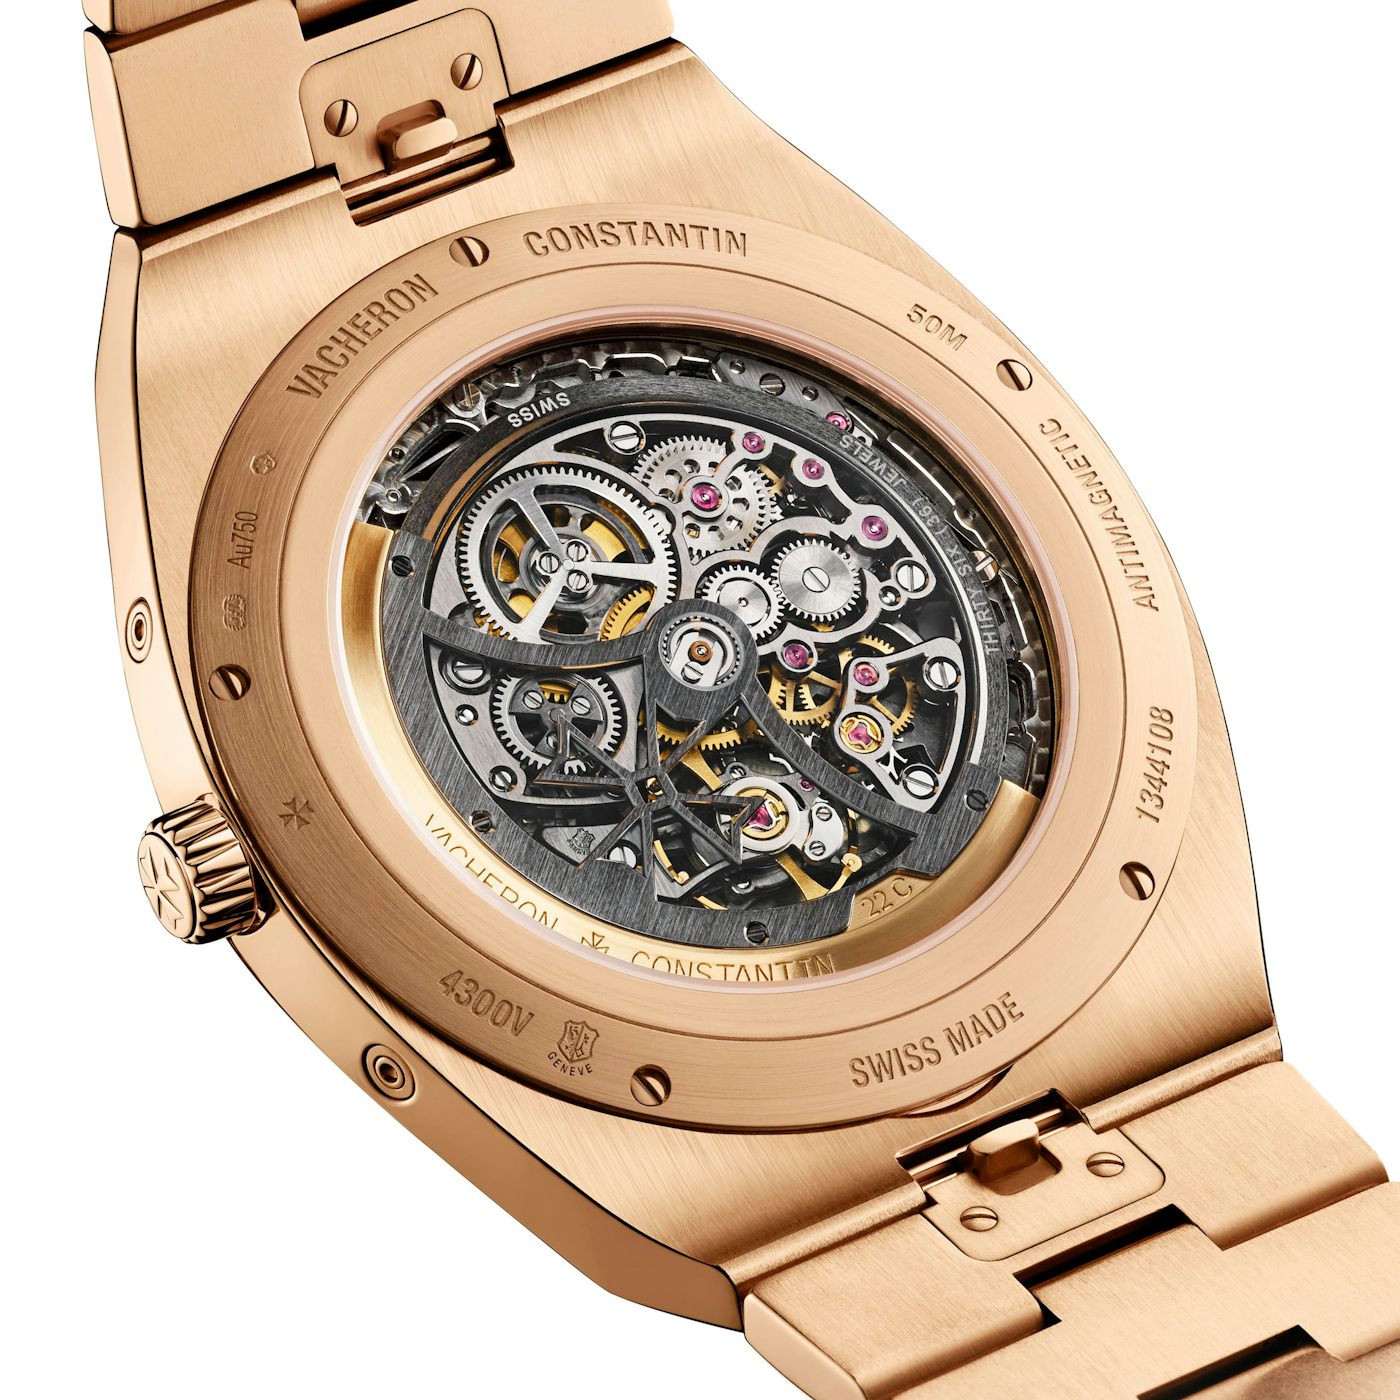 Vacheron Constantin skeletonized 1120QP is con the cutting edge of traditional horolgical art.